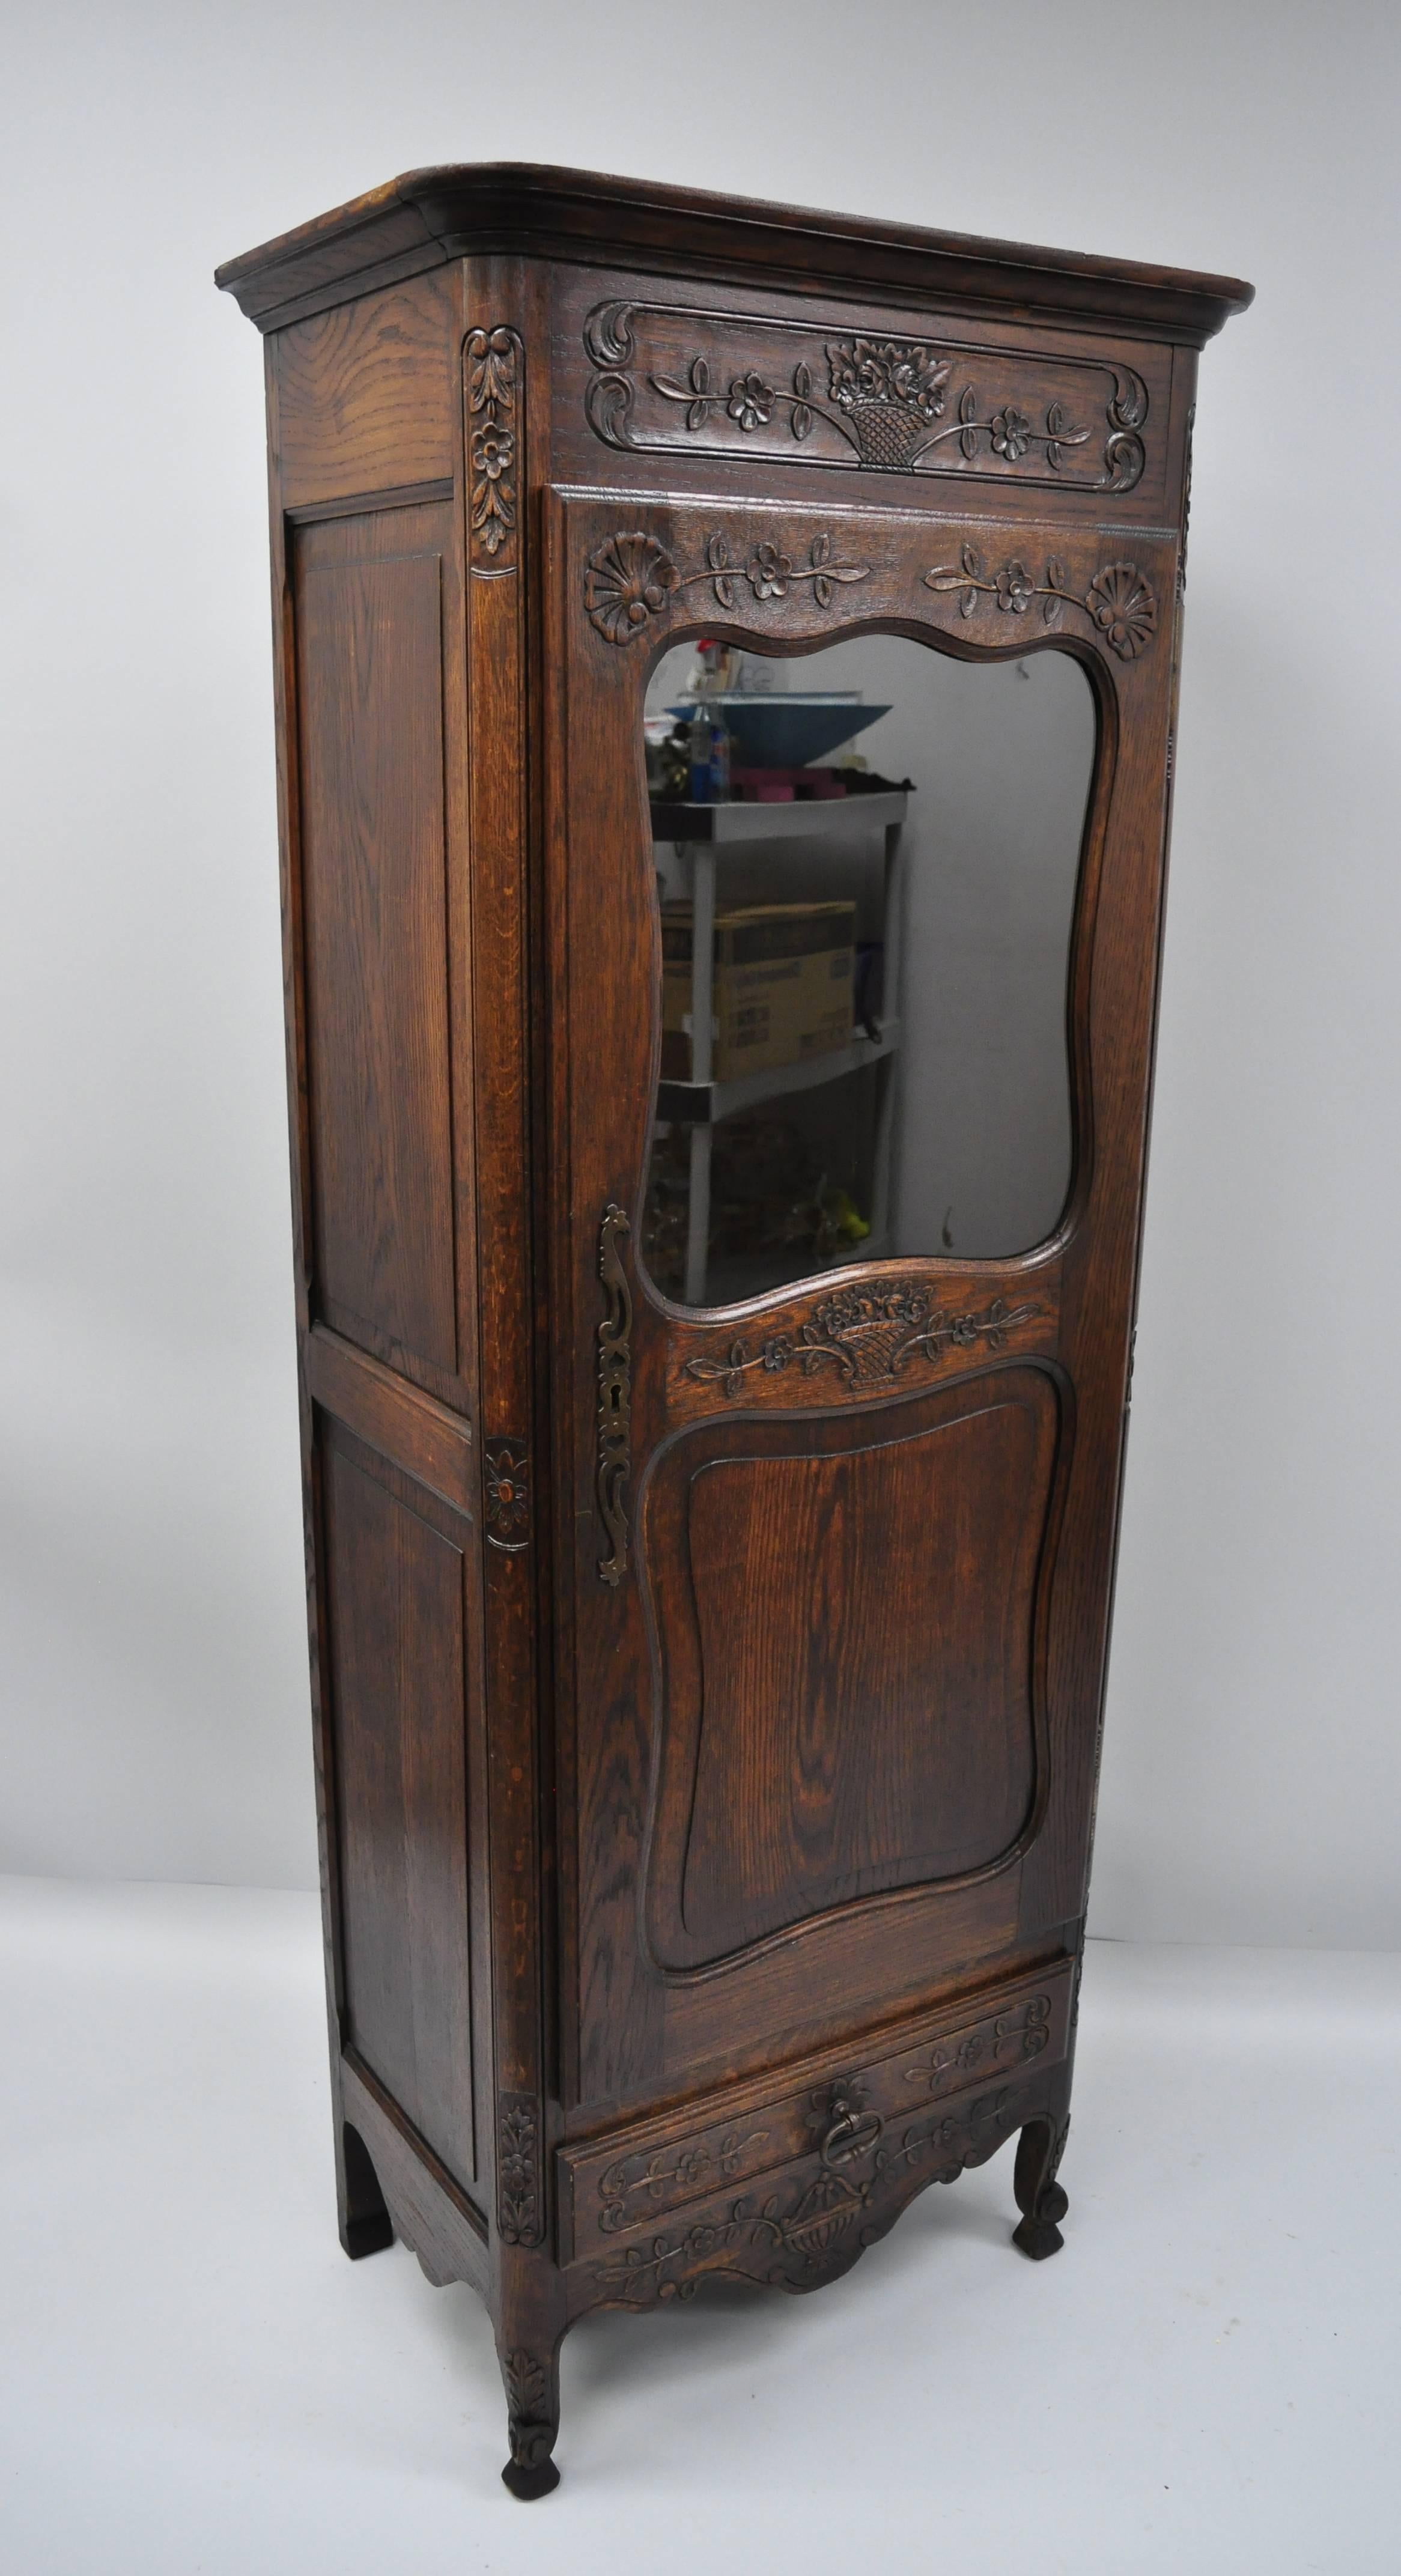 Antique French Country oak wood Curio étagère with floral carvings. Item features solid wood construction, beautiful wood grain, nicely carved details, one glass swing door, working lock and key, one dovetailed drawer, cabriole legs, circa early